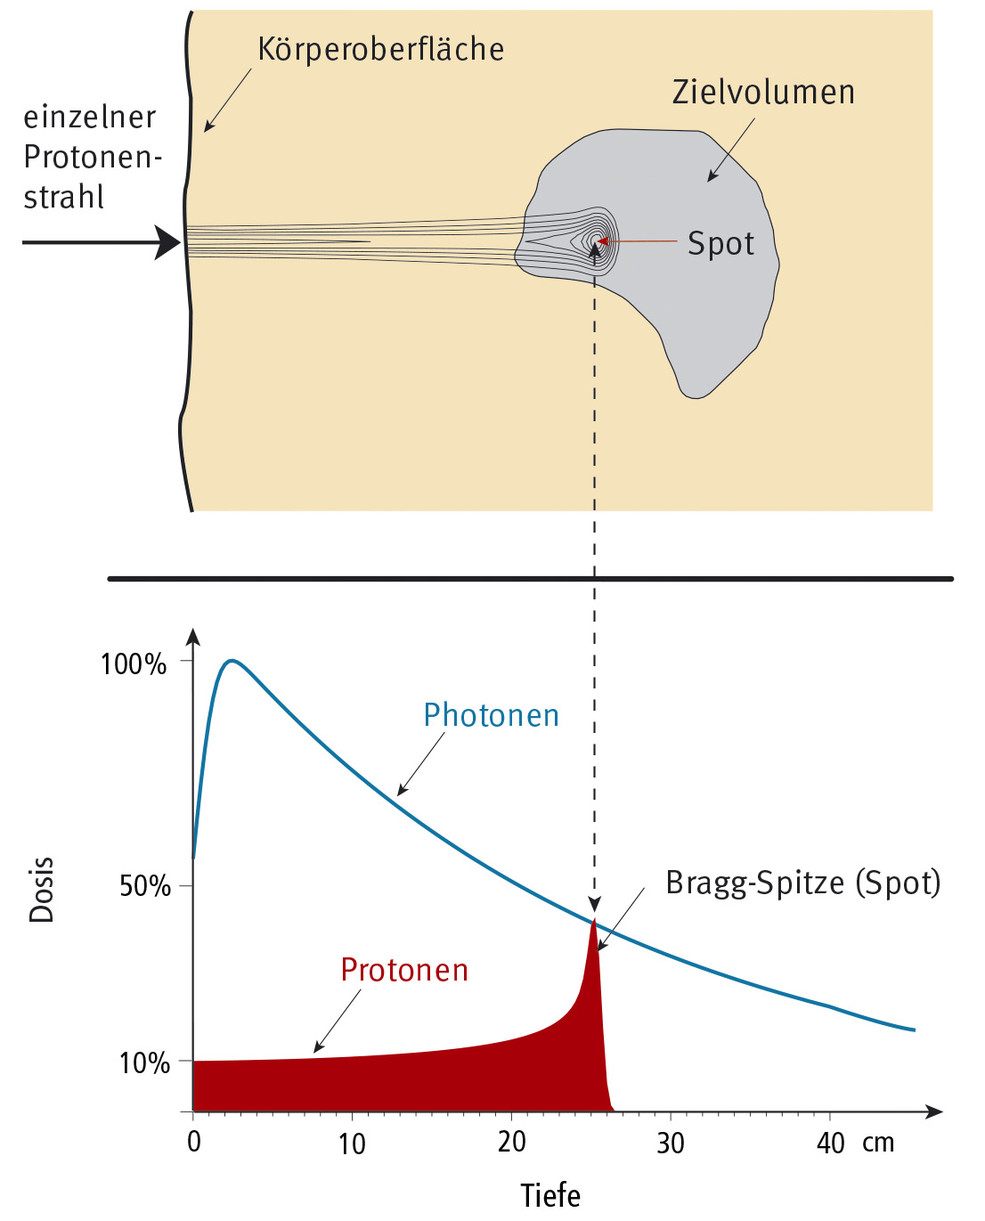 Radiation dose of a pencil-thin proton beam along the penetration depth into the body. Radiation dose of a proton pencil beam as a function of depth of tissue. The range of this proton beam is 25 cm. In the top panel the dose distribution is shown. In the bottom panel the dose deposited by a proton beam in comparison with that of a photon beam is shown.